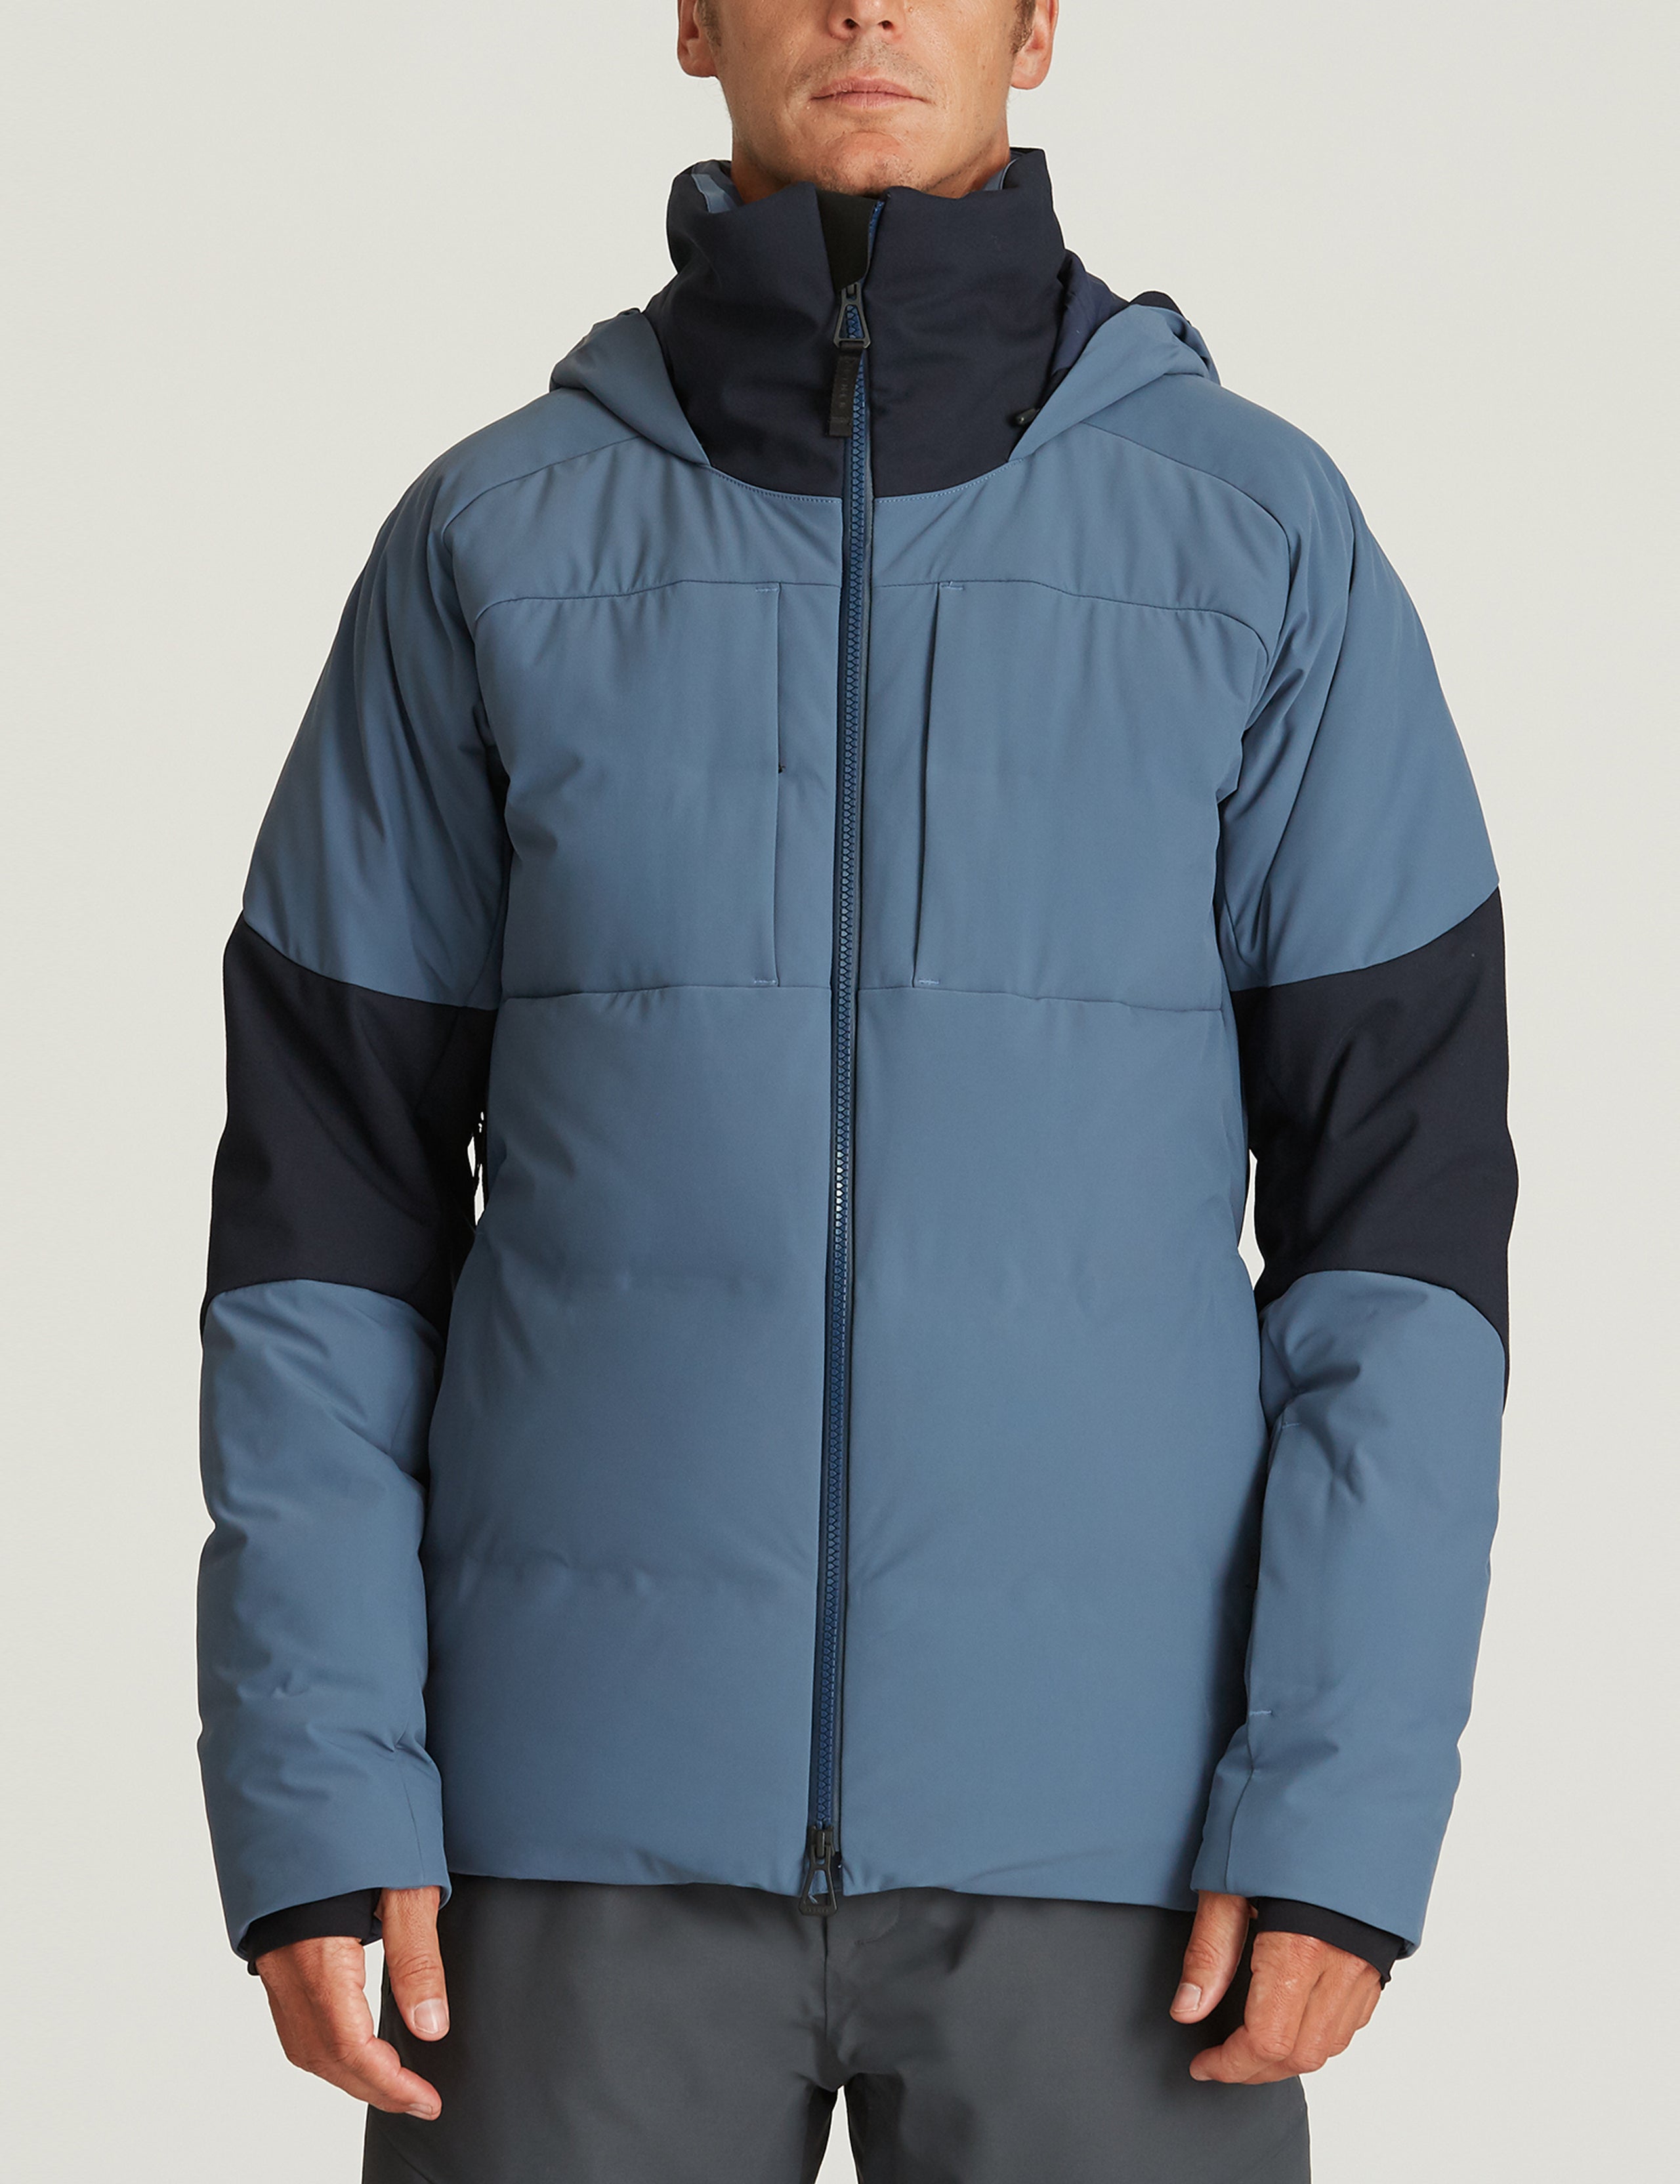 man wearing blue ski jacket from Aether Apparel